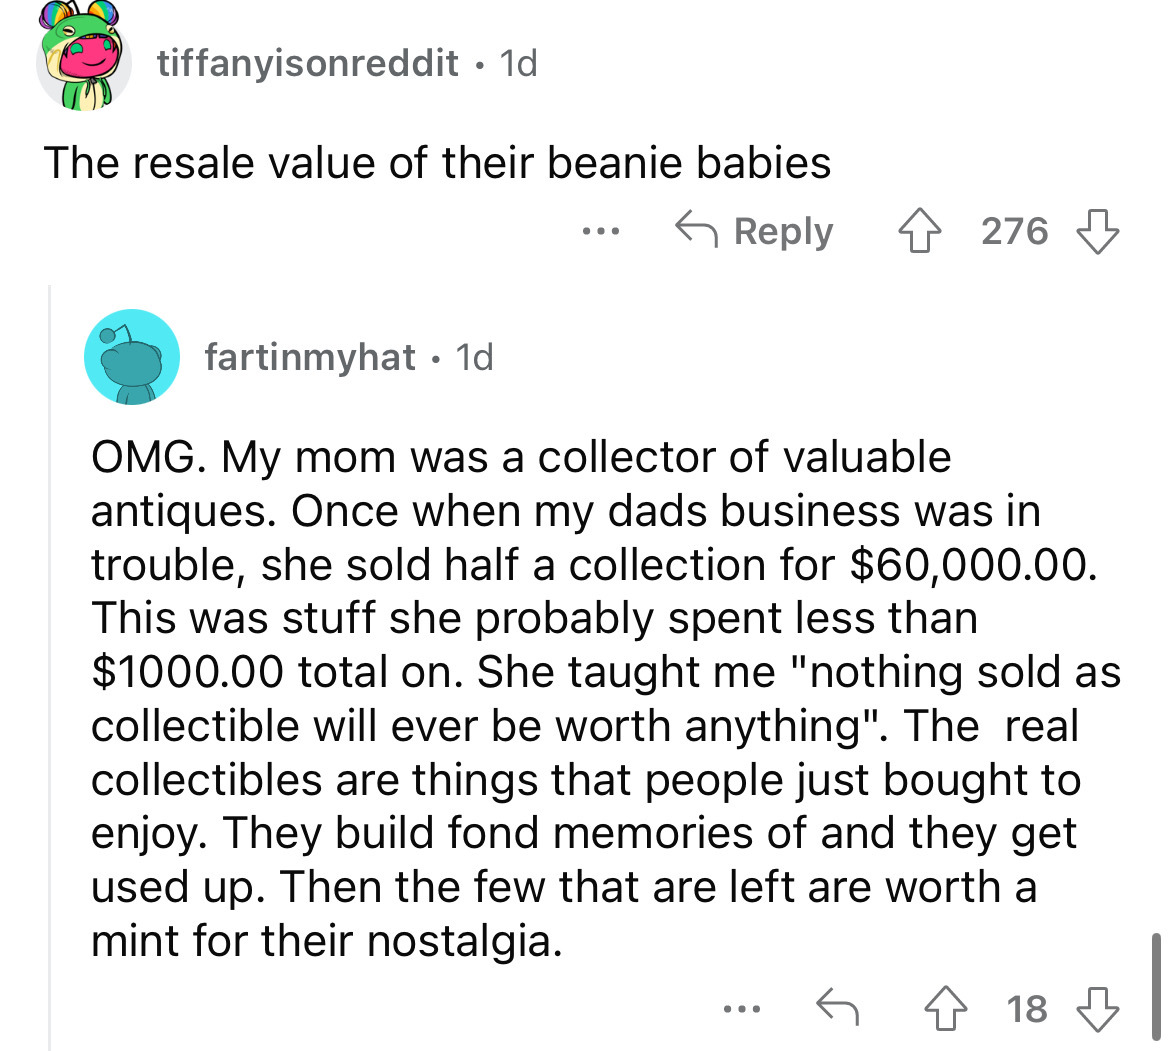 angle - tiffanyisonreddit. 1d The resale value of their beanie babies ... 276 fartinmyhat. 1d Omg. My mom was a collector of valuable antiques. Once when my dads business was in trouble, she sold half a collection for $60,000.00. This was stuff she probab